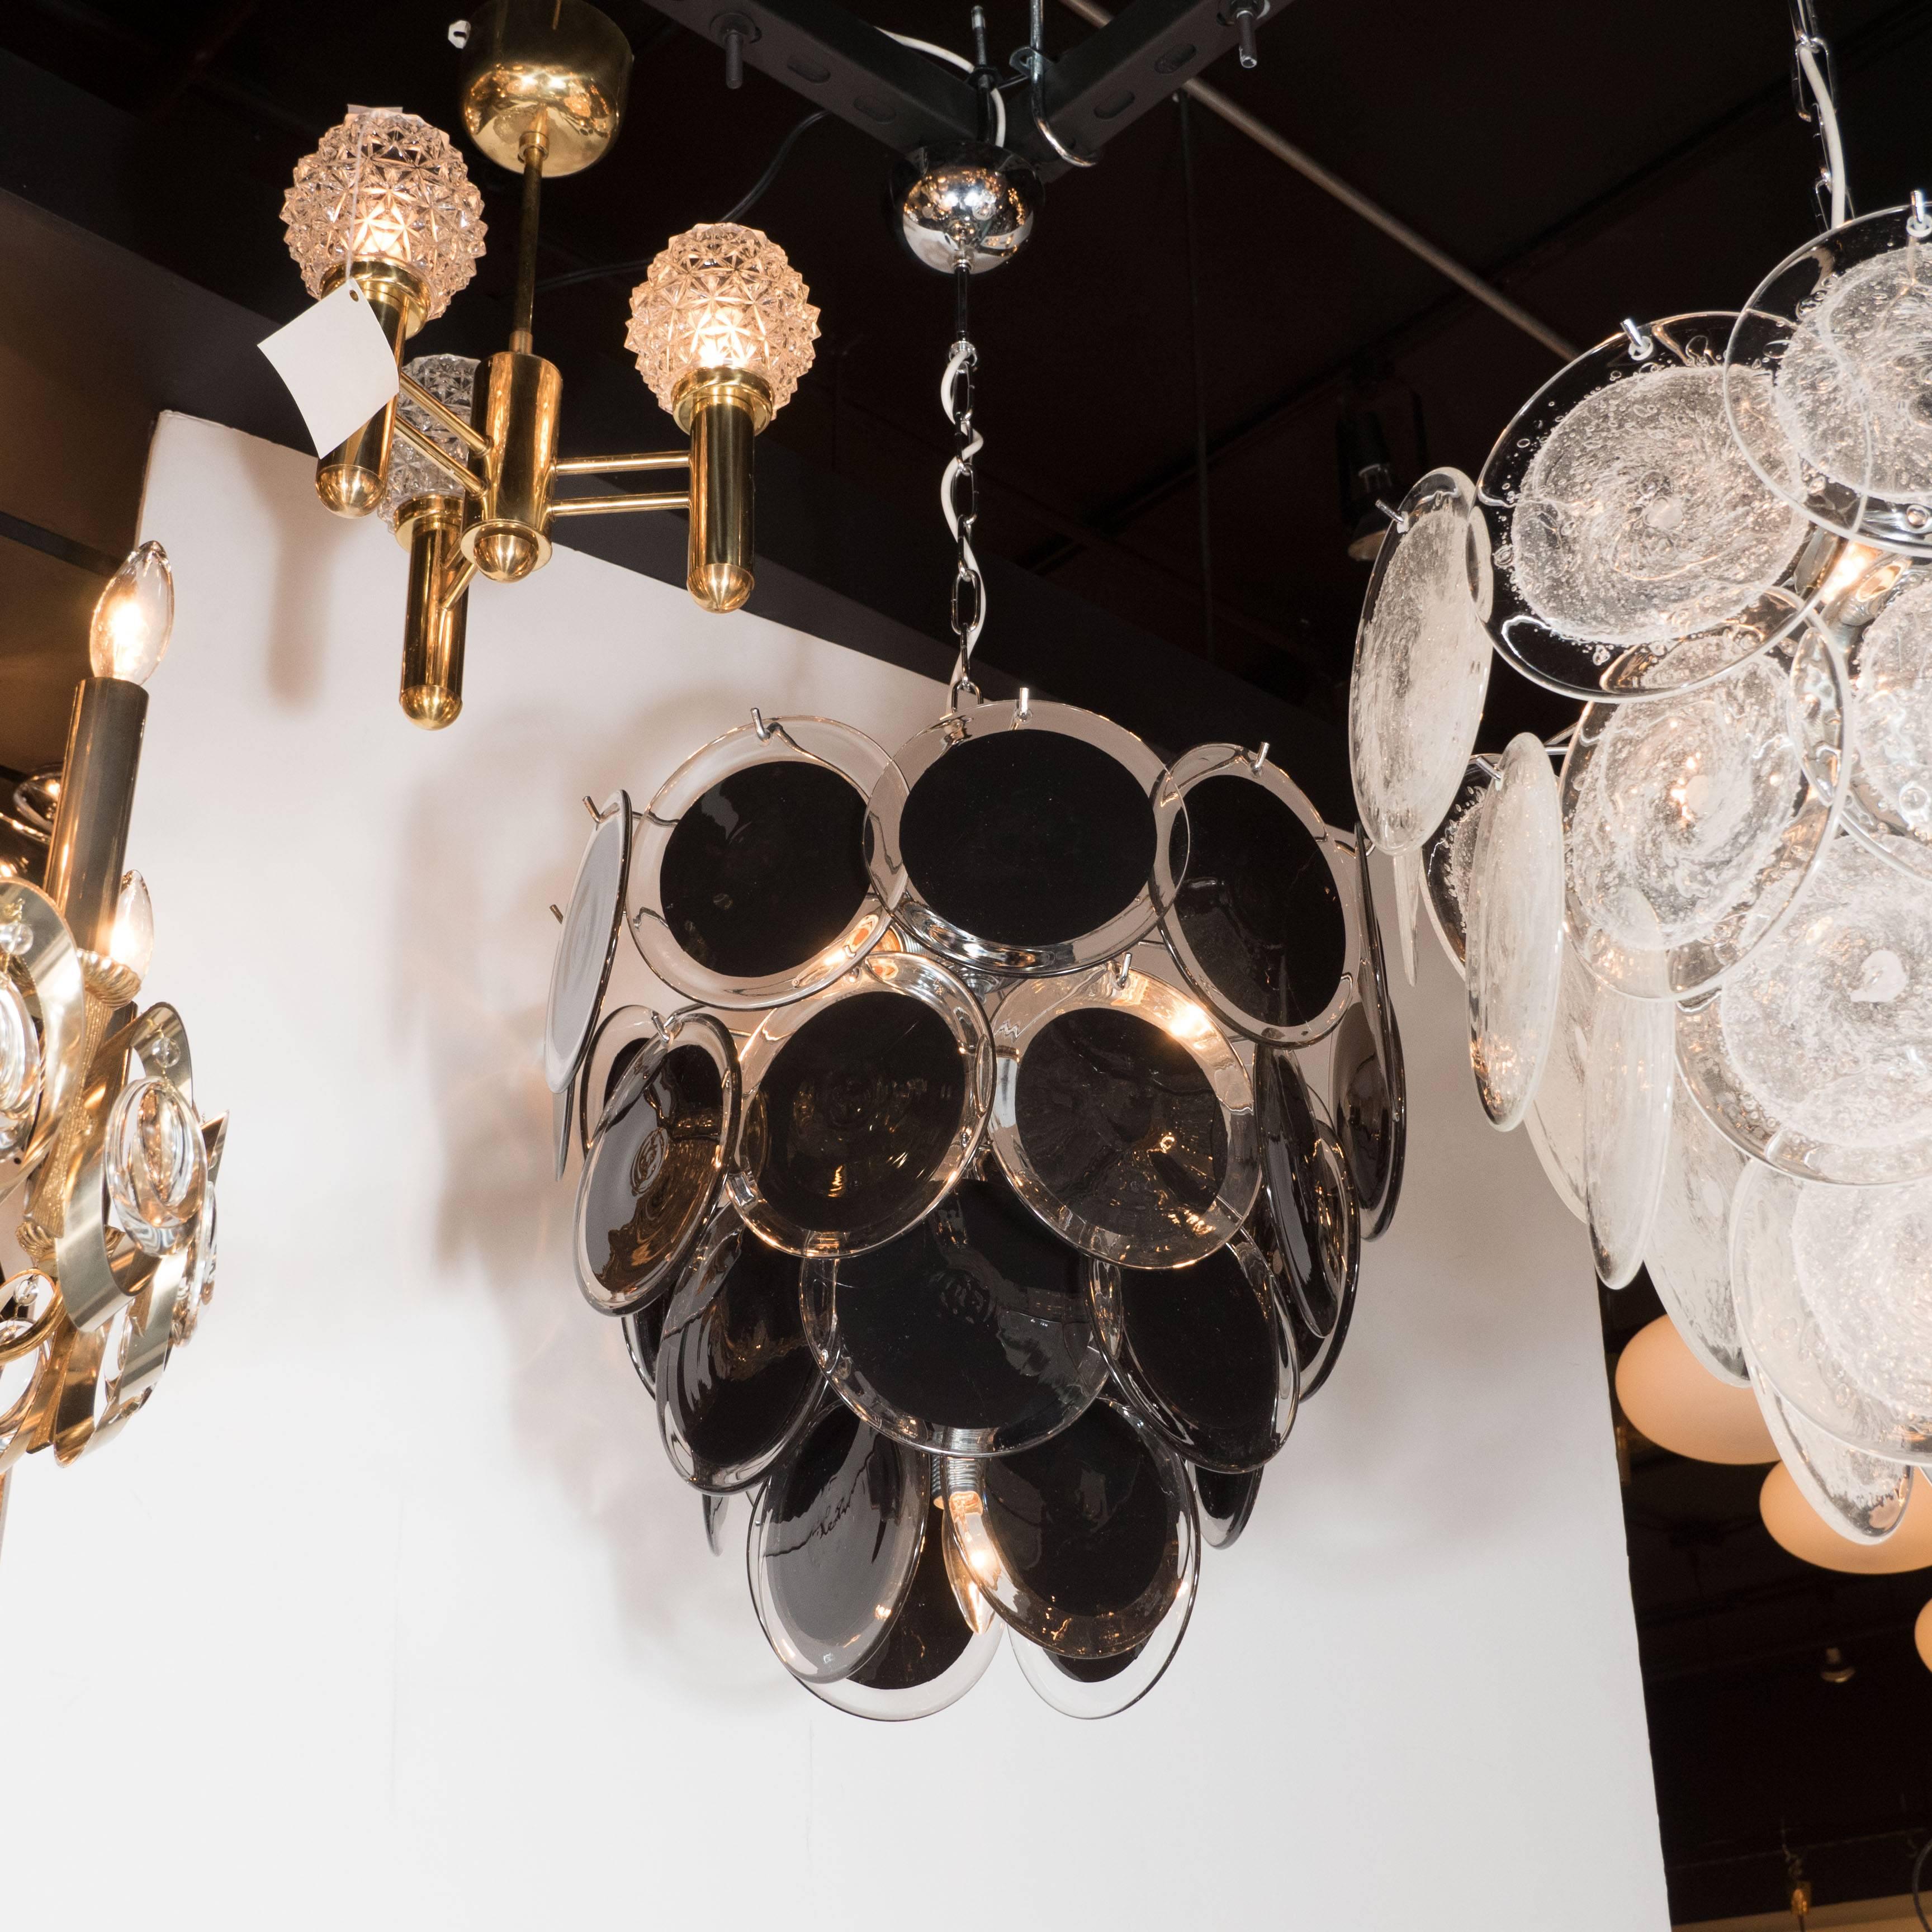 This Modernist chandelier, in the manner of Vistosi, features 36 individually suspended black discs with clear rims in handmade Murano glass. Collectively, the discs offer a cascading four tiered design. With its forward thinking, yet incredibly